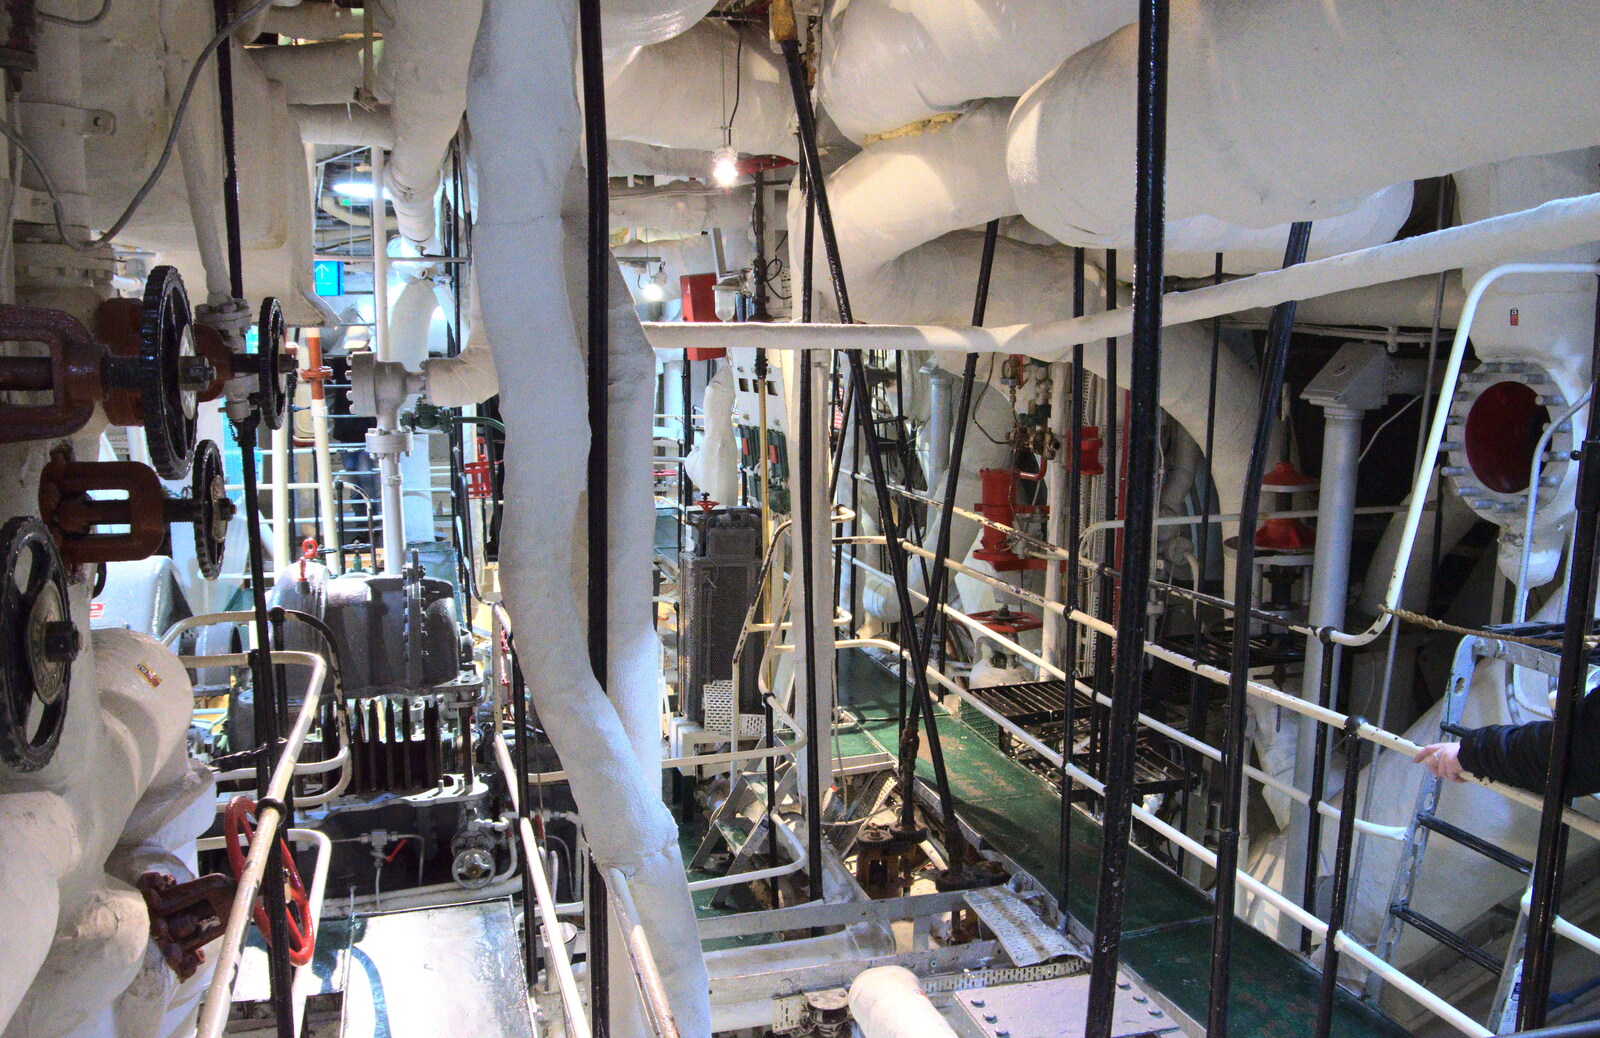 The engine room is just a tangle of pipes from HMS Belfast and the South Bank, Southwark, London - 17th February 2020